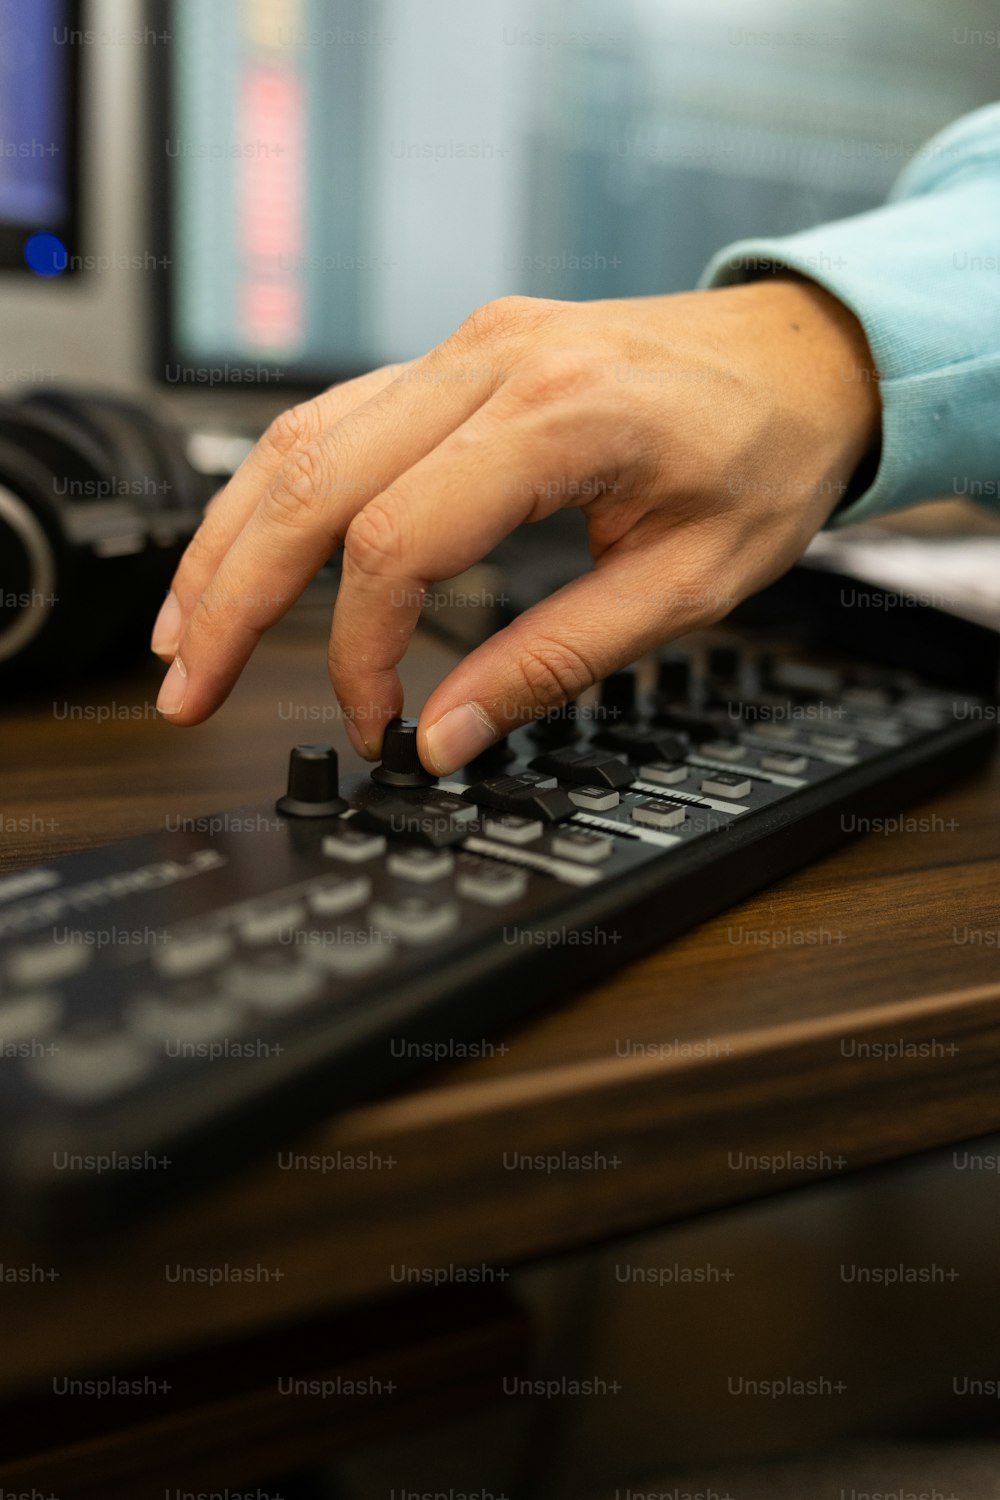 a person is pressing buttons on a keyboard